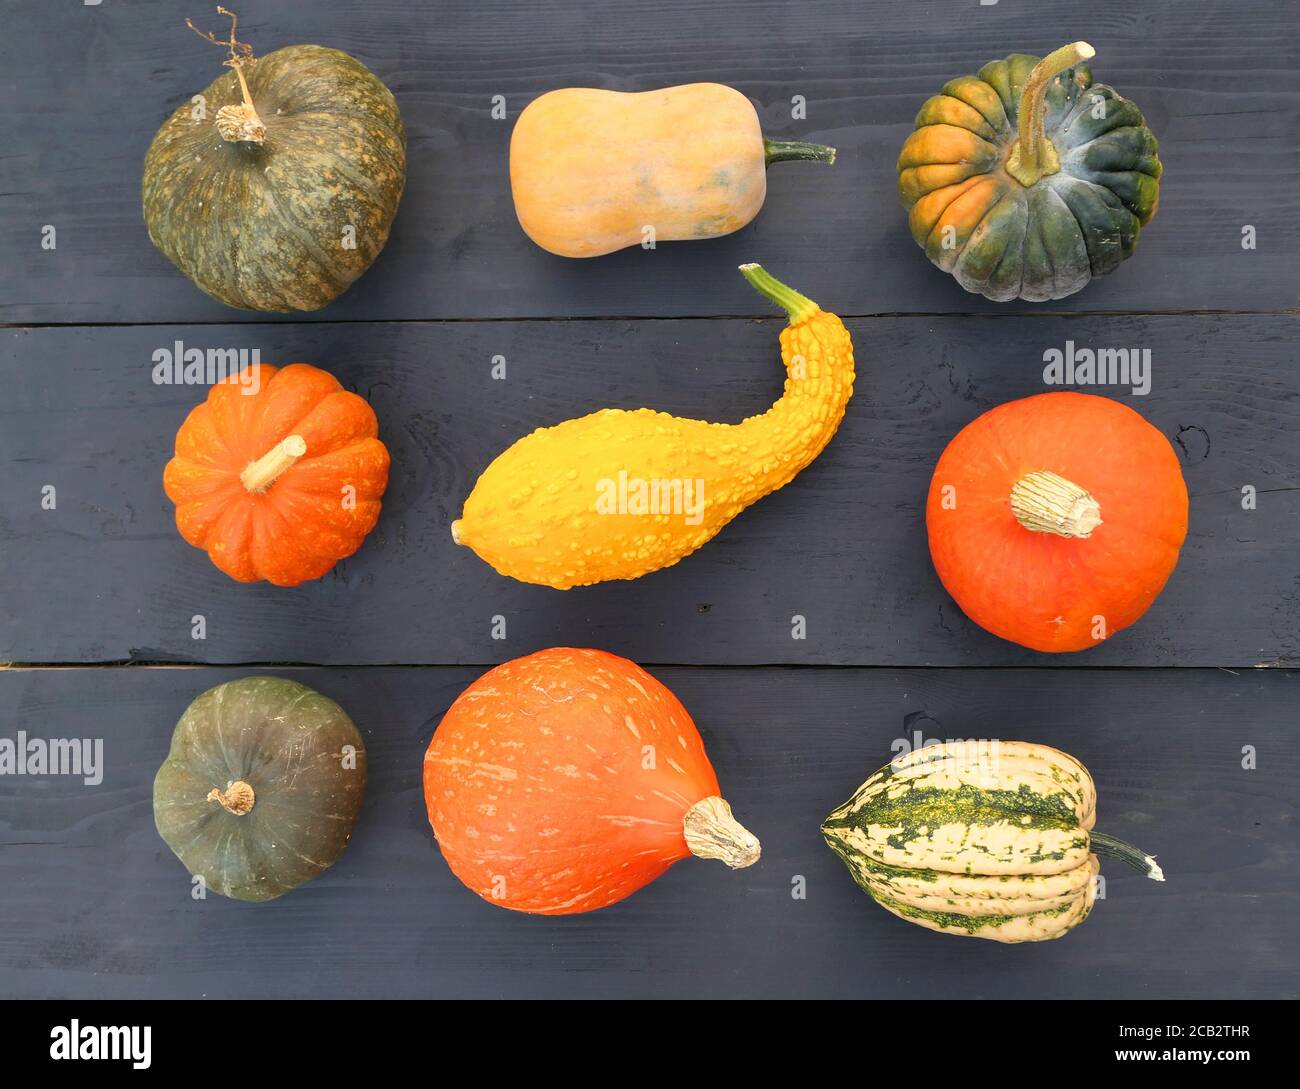 Different varieties of pumpkins and squashes on black wooden background. Stock Photo